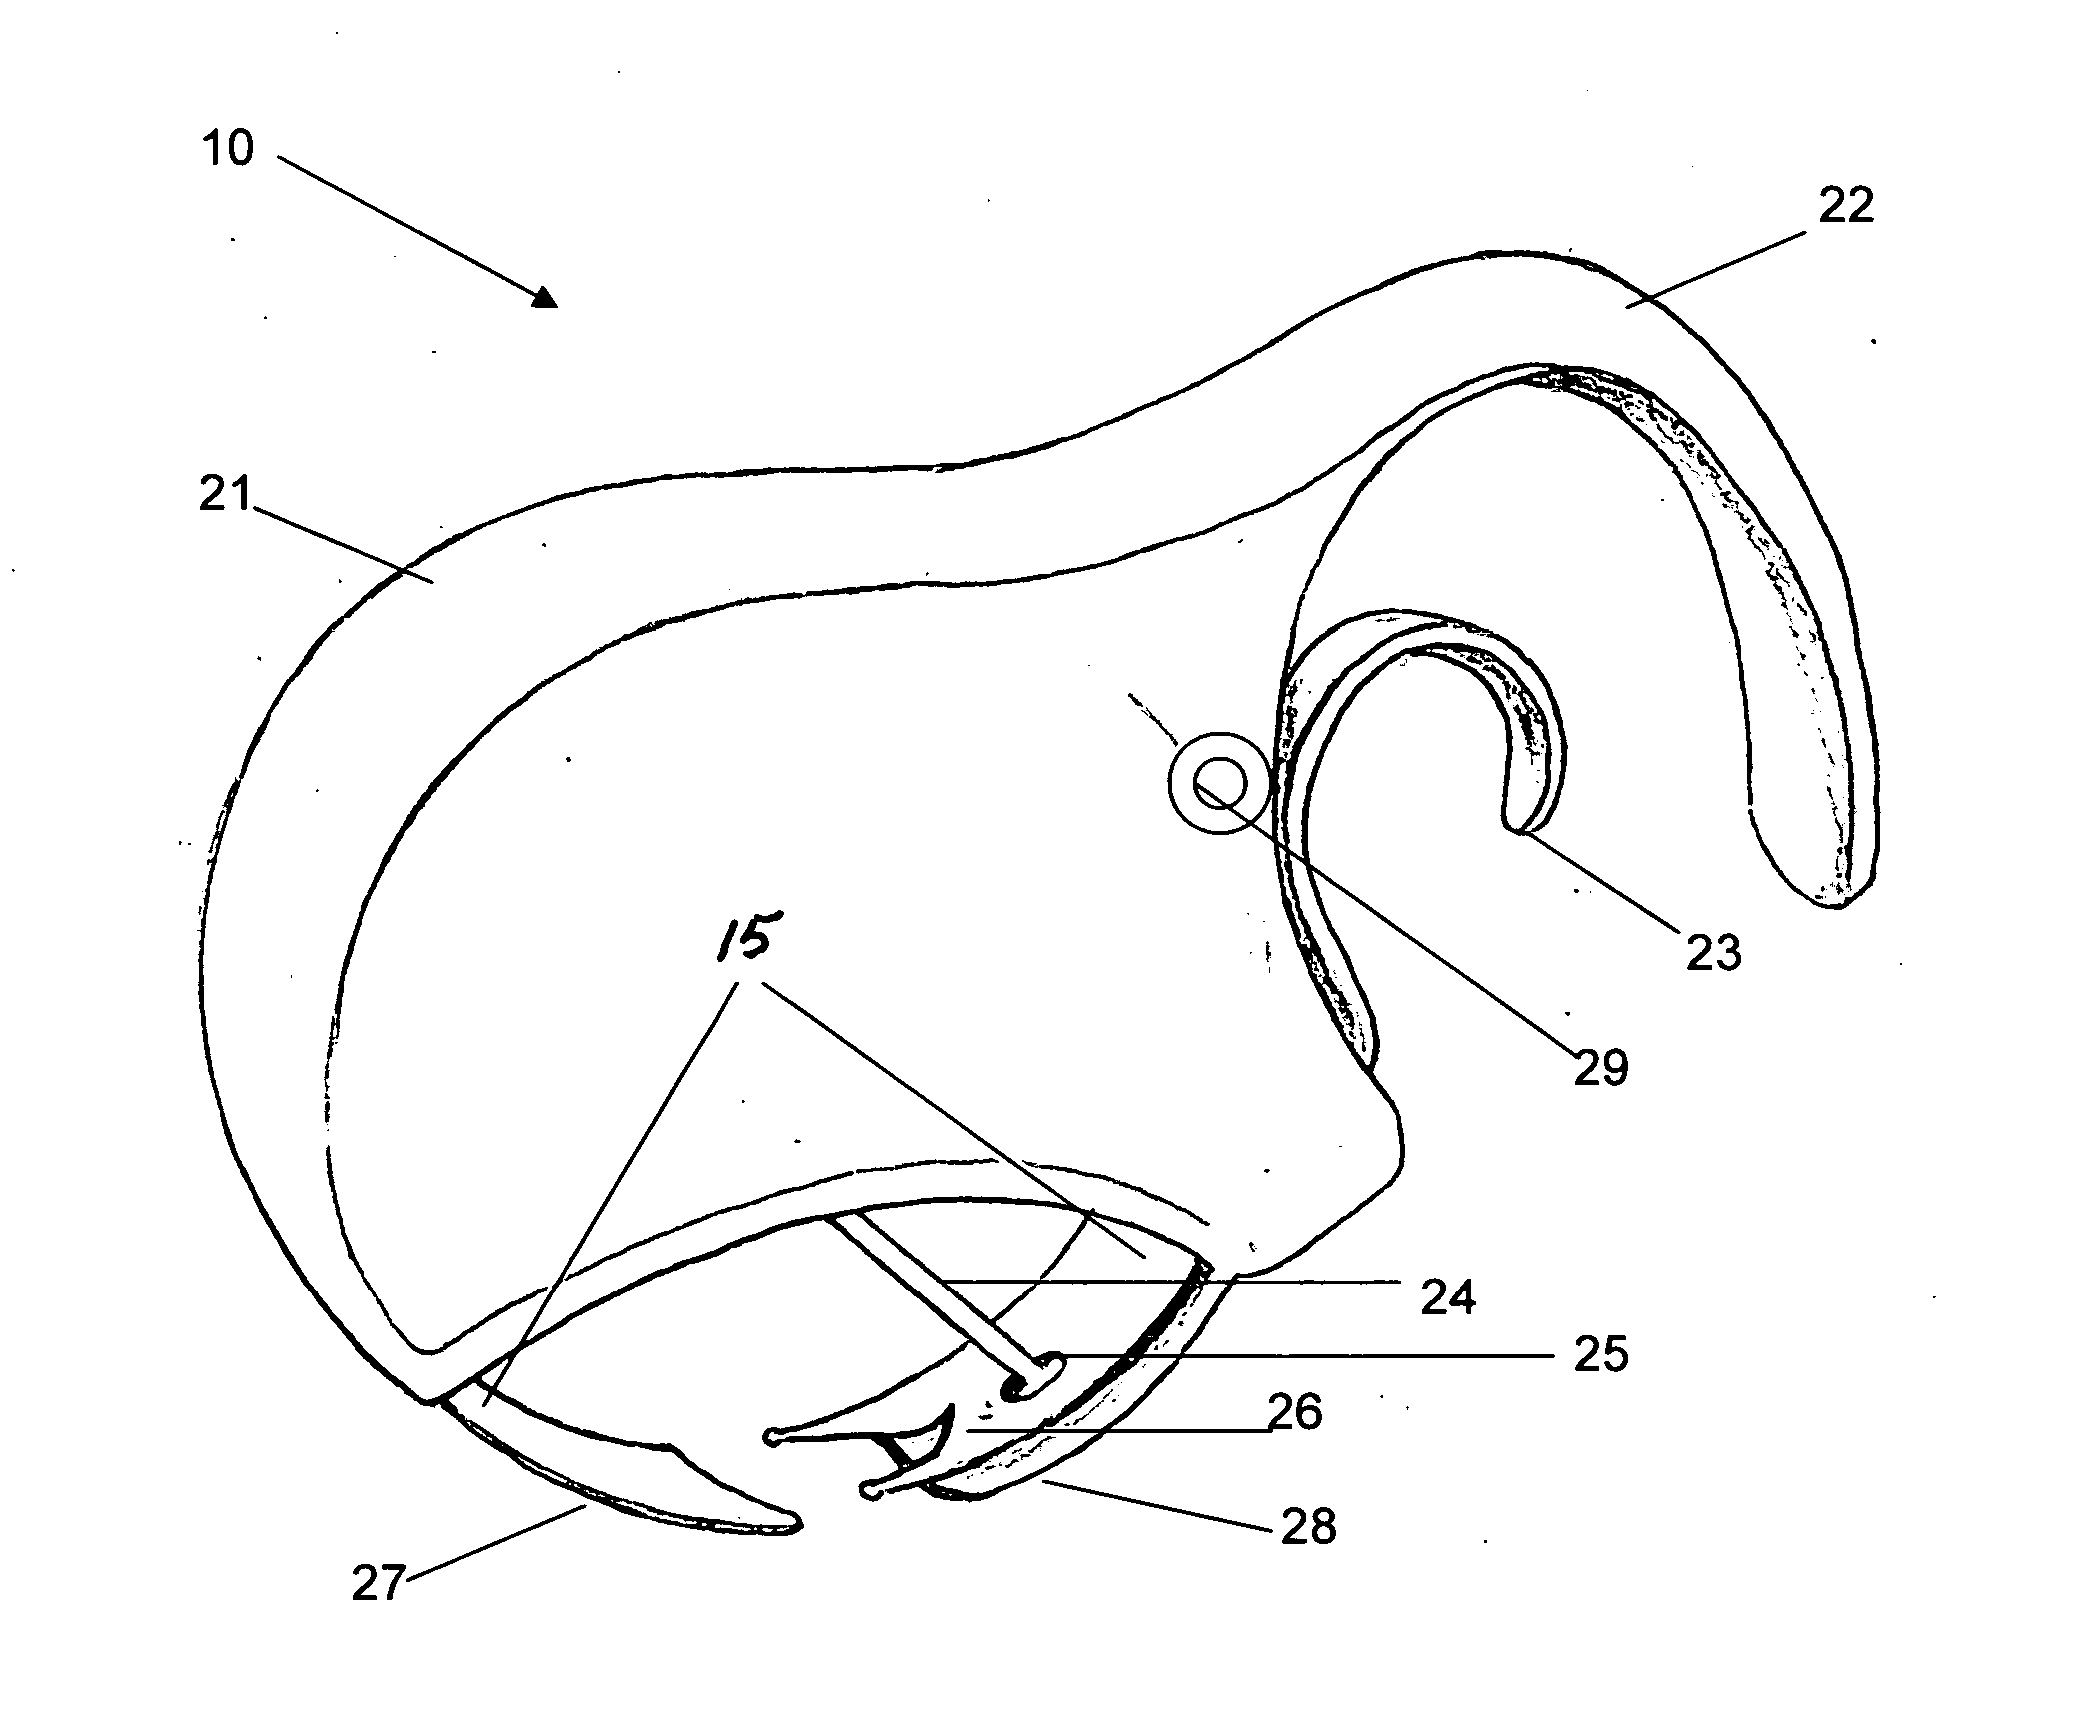 Band blade suture remover apparatus and method